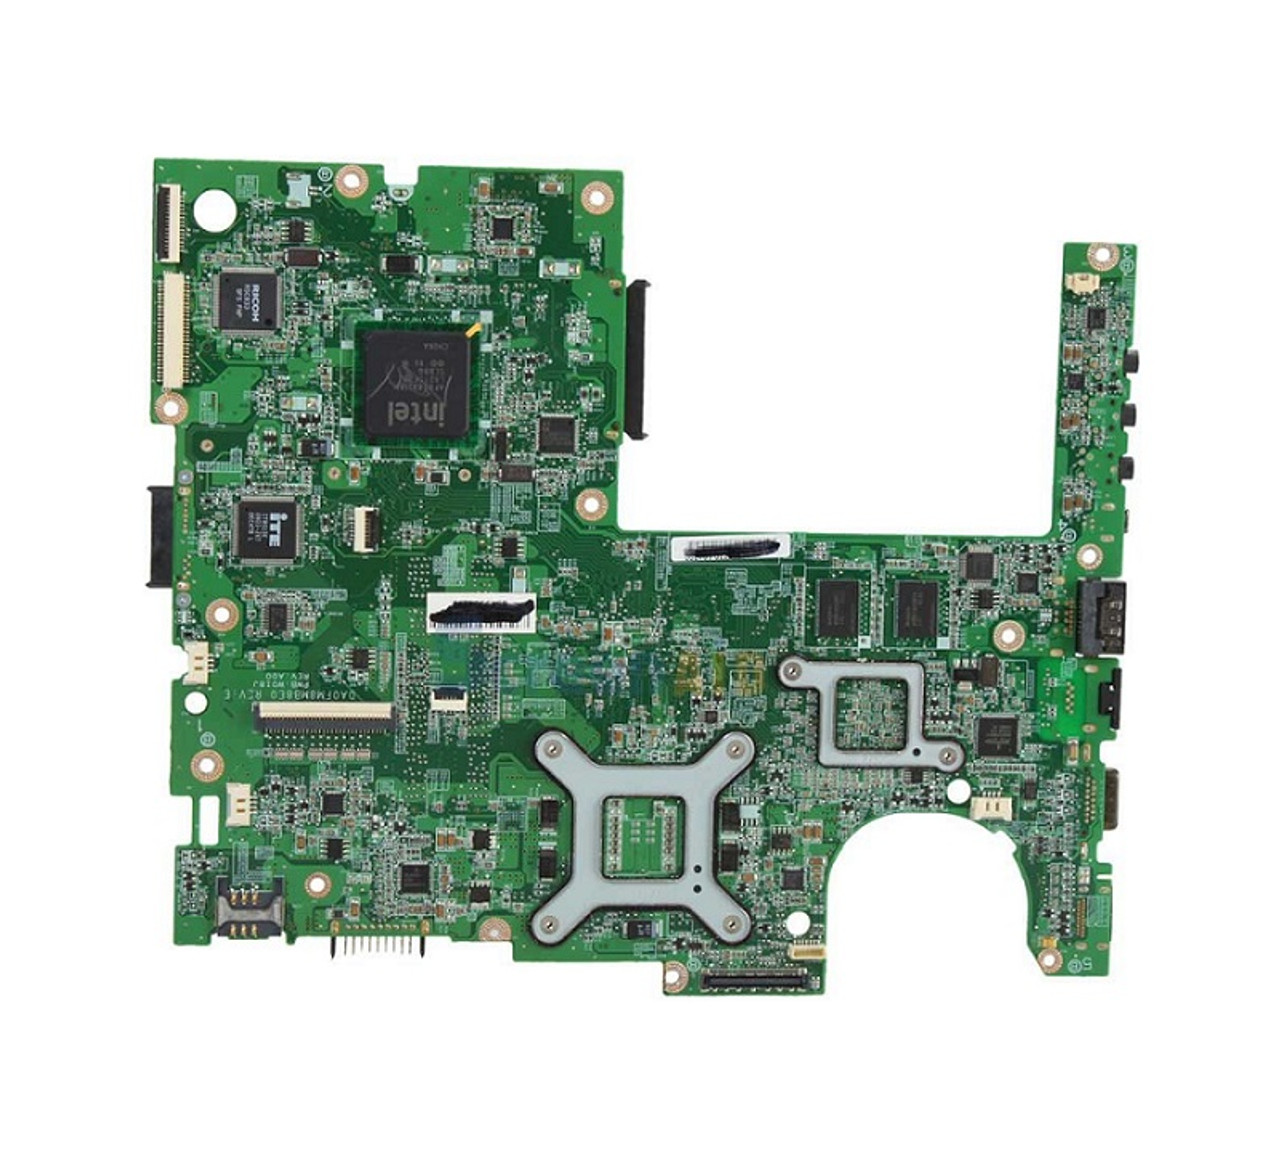 0X1CHG - Dell System Board (Motherboard) Core i3 2.2GHz (i3-2330M) with CPU for Latitude E6320 (Refurbished)